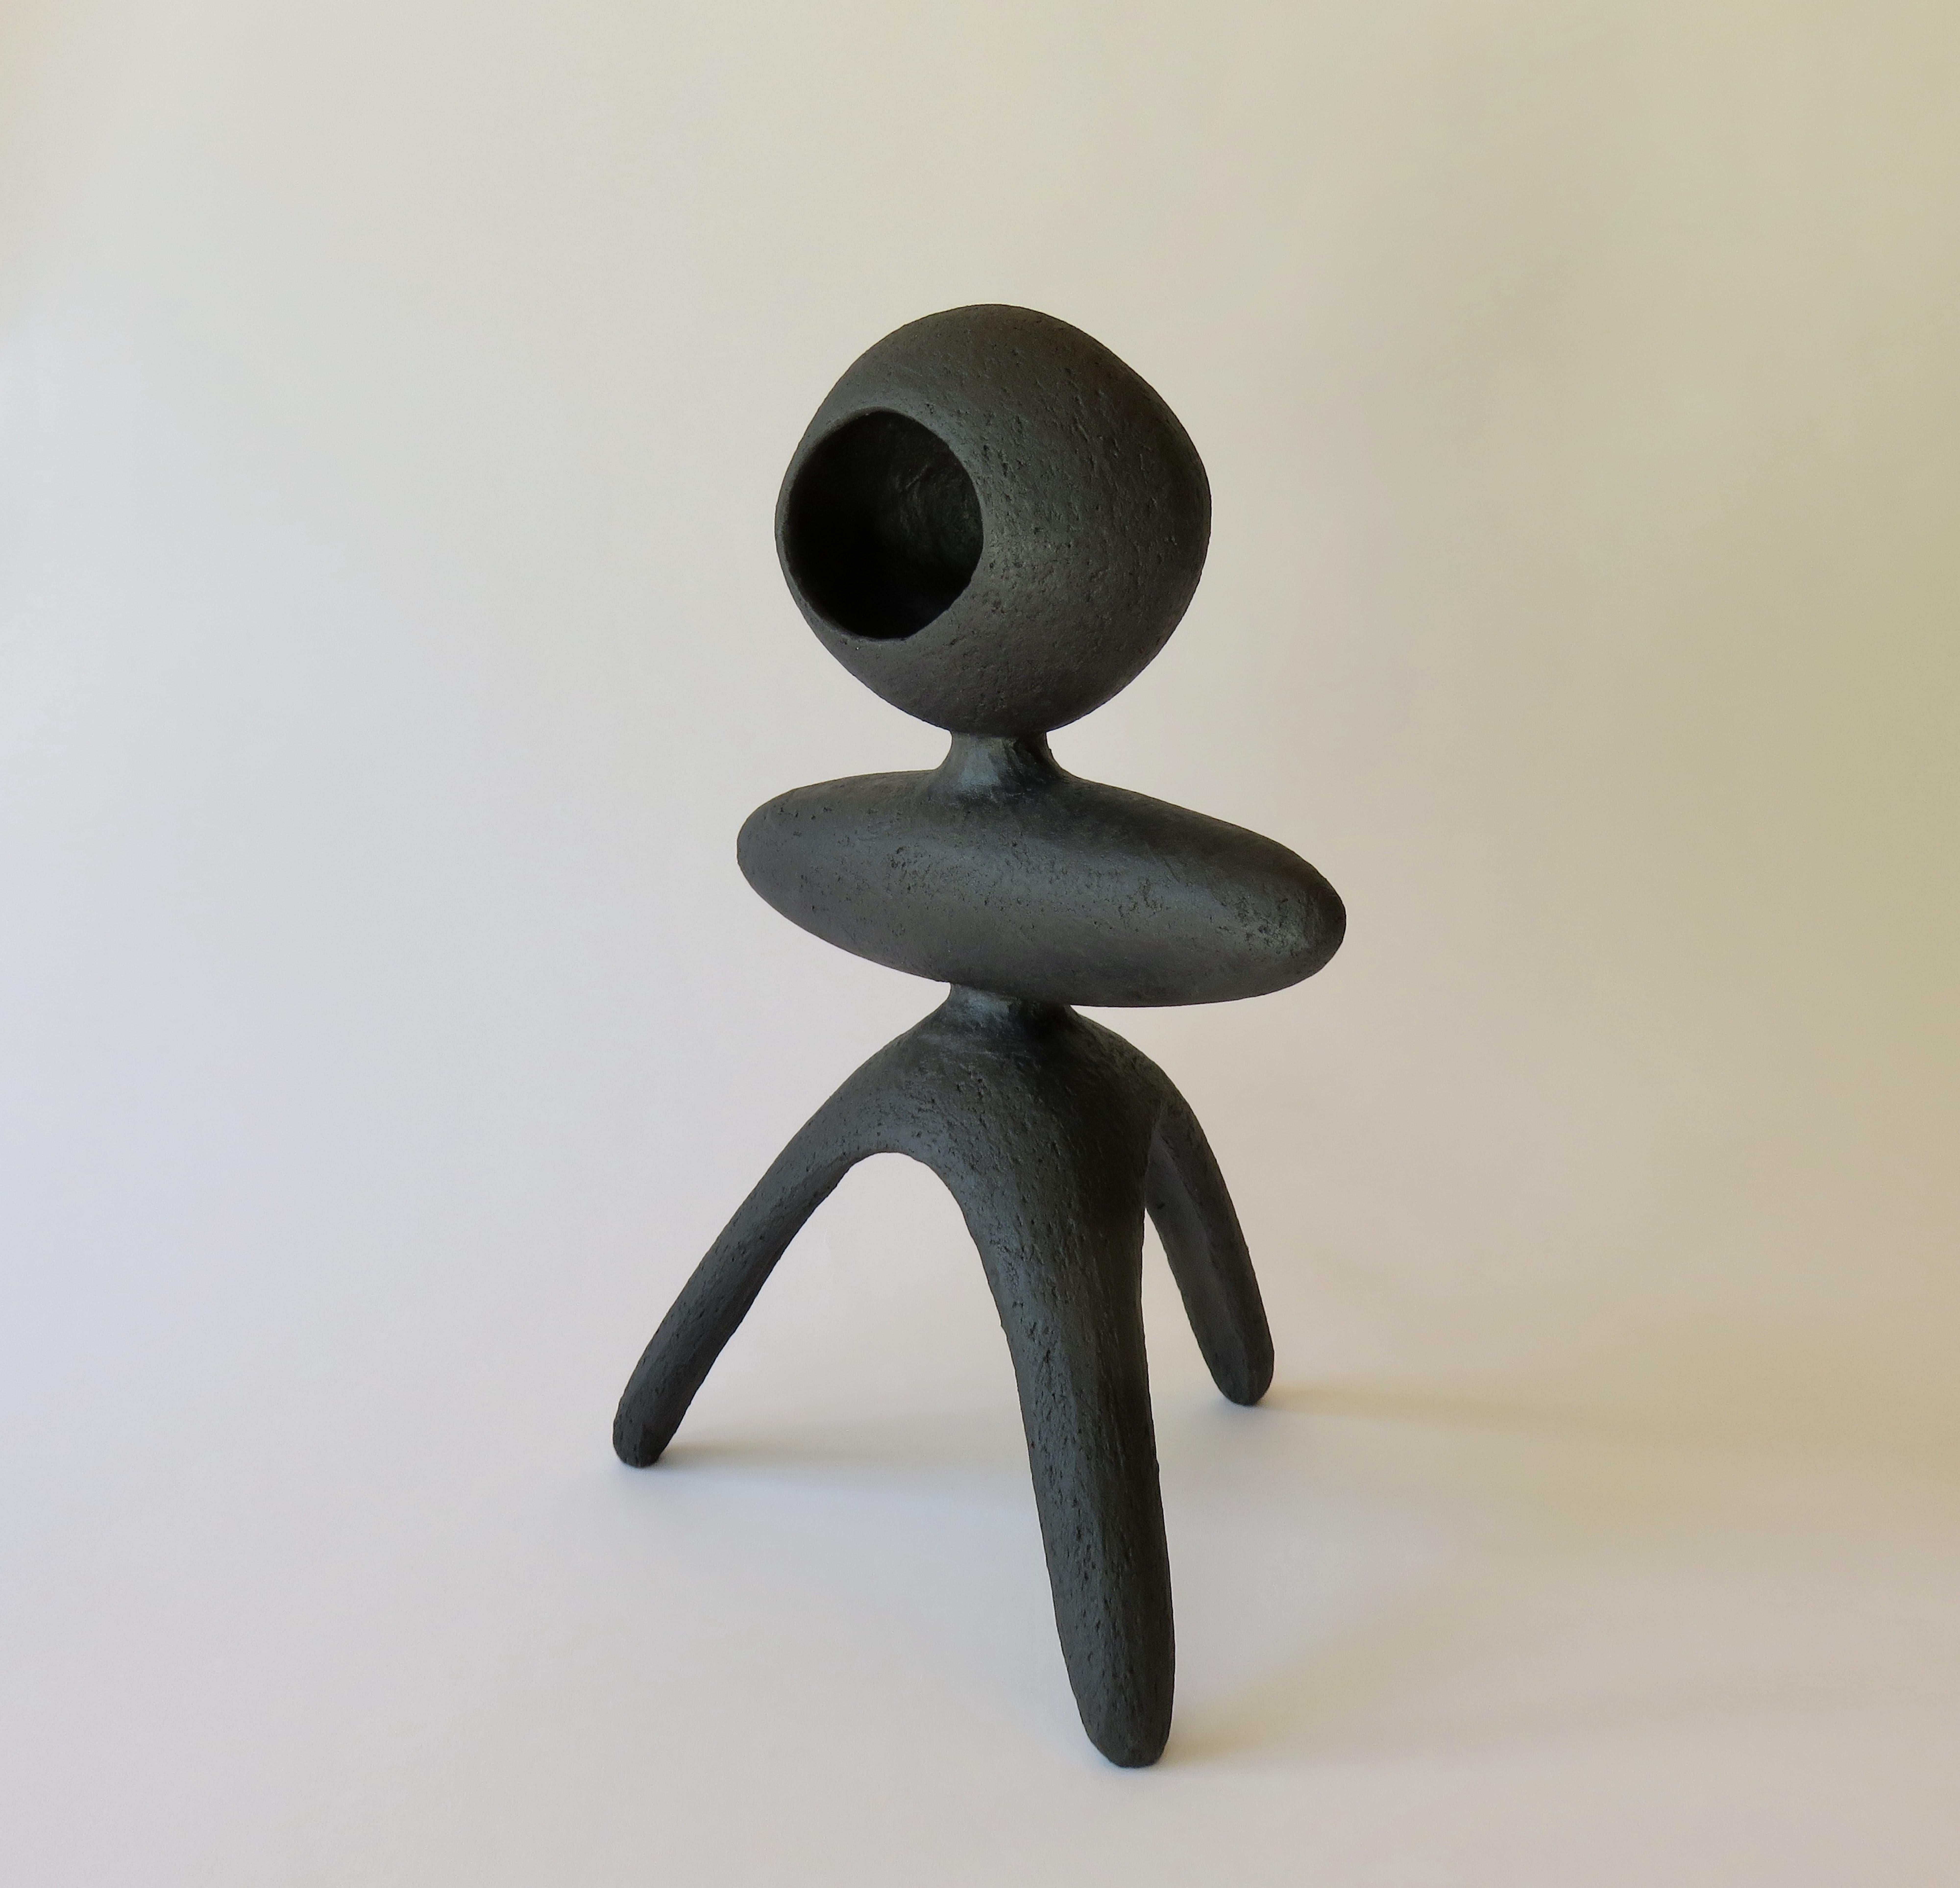 One in a series of Modern Primitive TOTEMS, in Matte Black, Underglazed Stoneware.
Each TOTEM has its own personality consisting of various hand-formed shapes connected together, and fired in the kiln. This one has an open oval top, a long